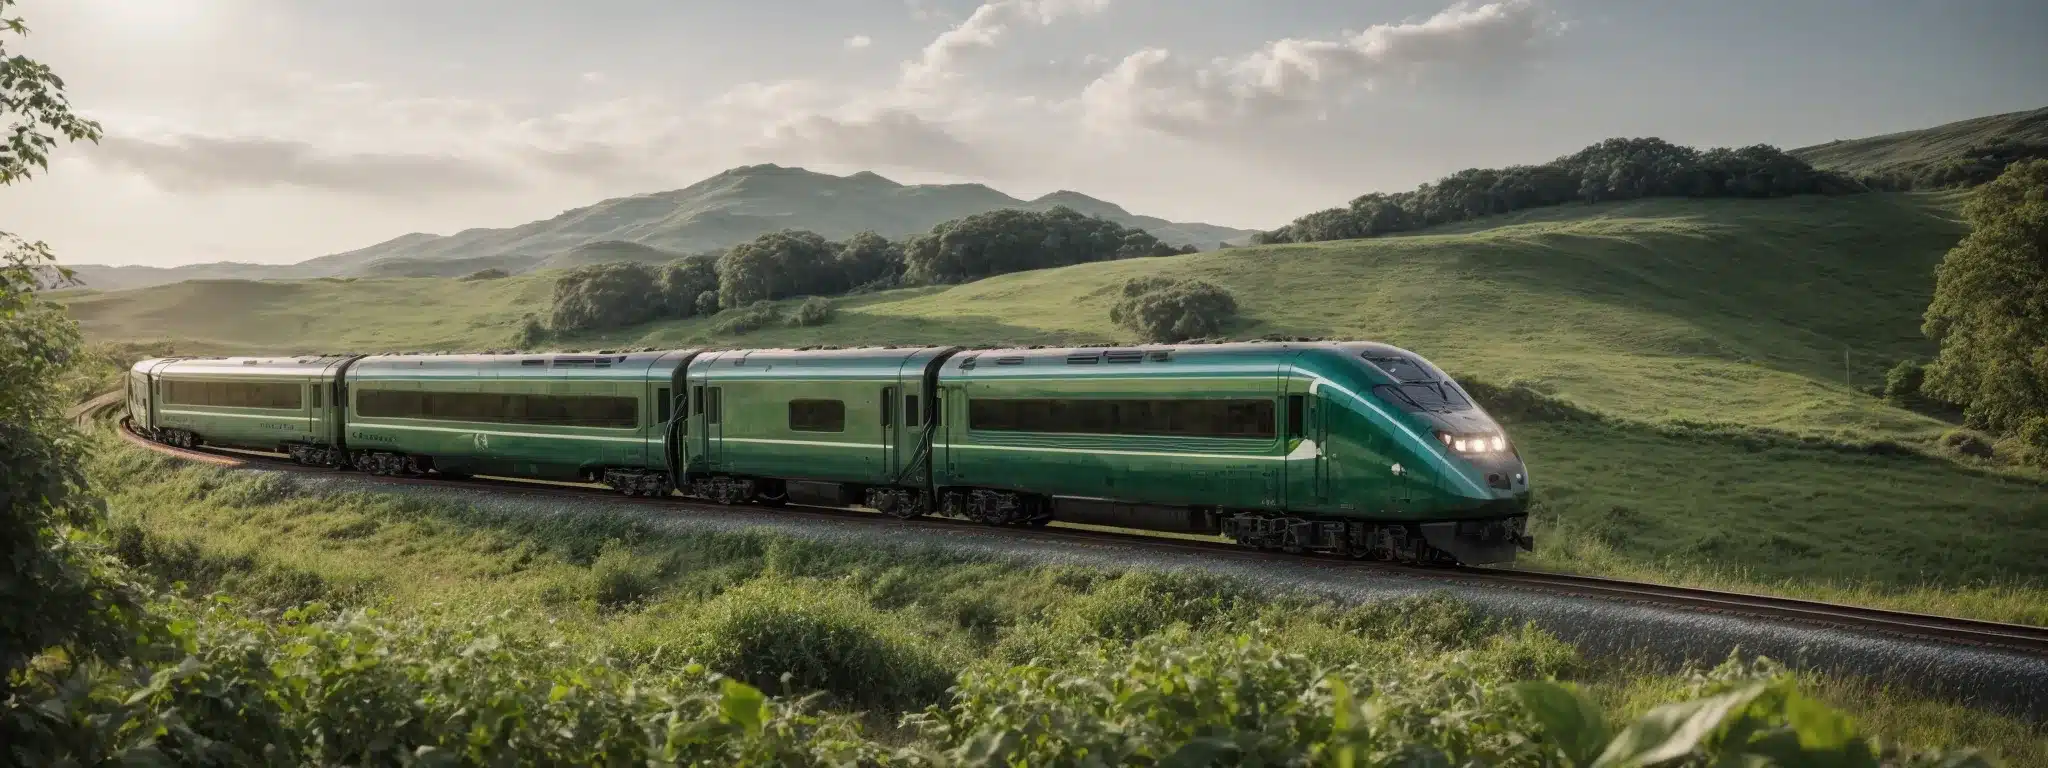 A Train Glides Along A Track Through A Verdant Landscape, Symbolizing The Innovation Journey In Product Development.